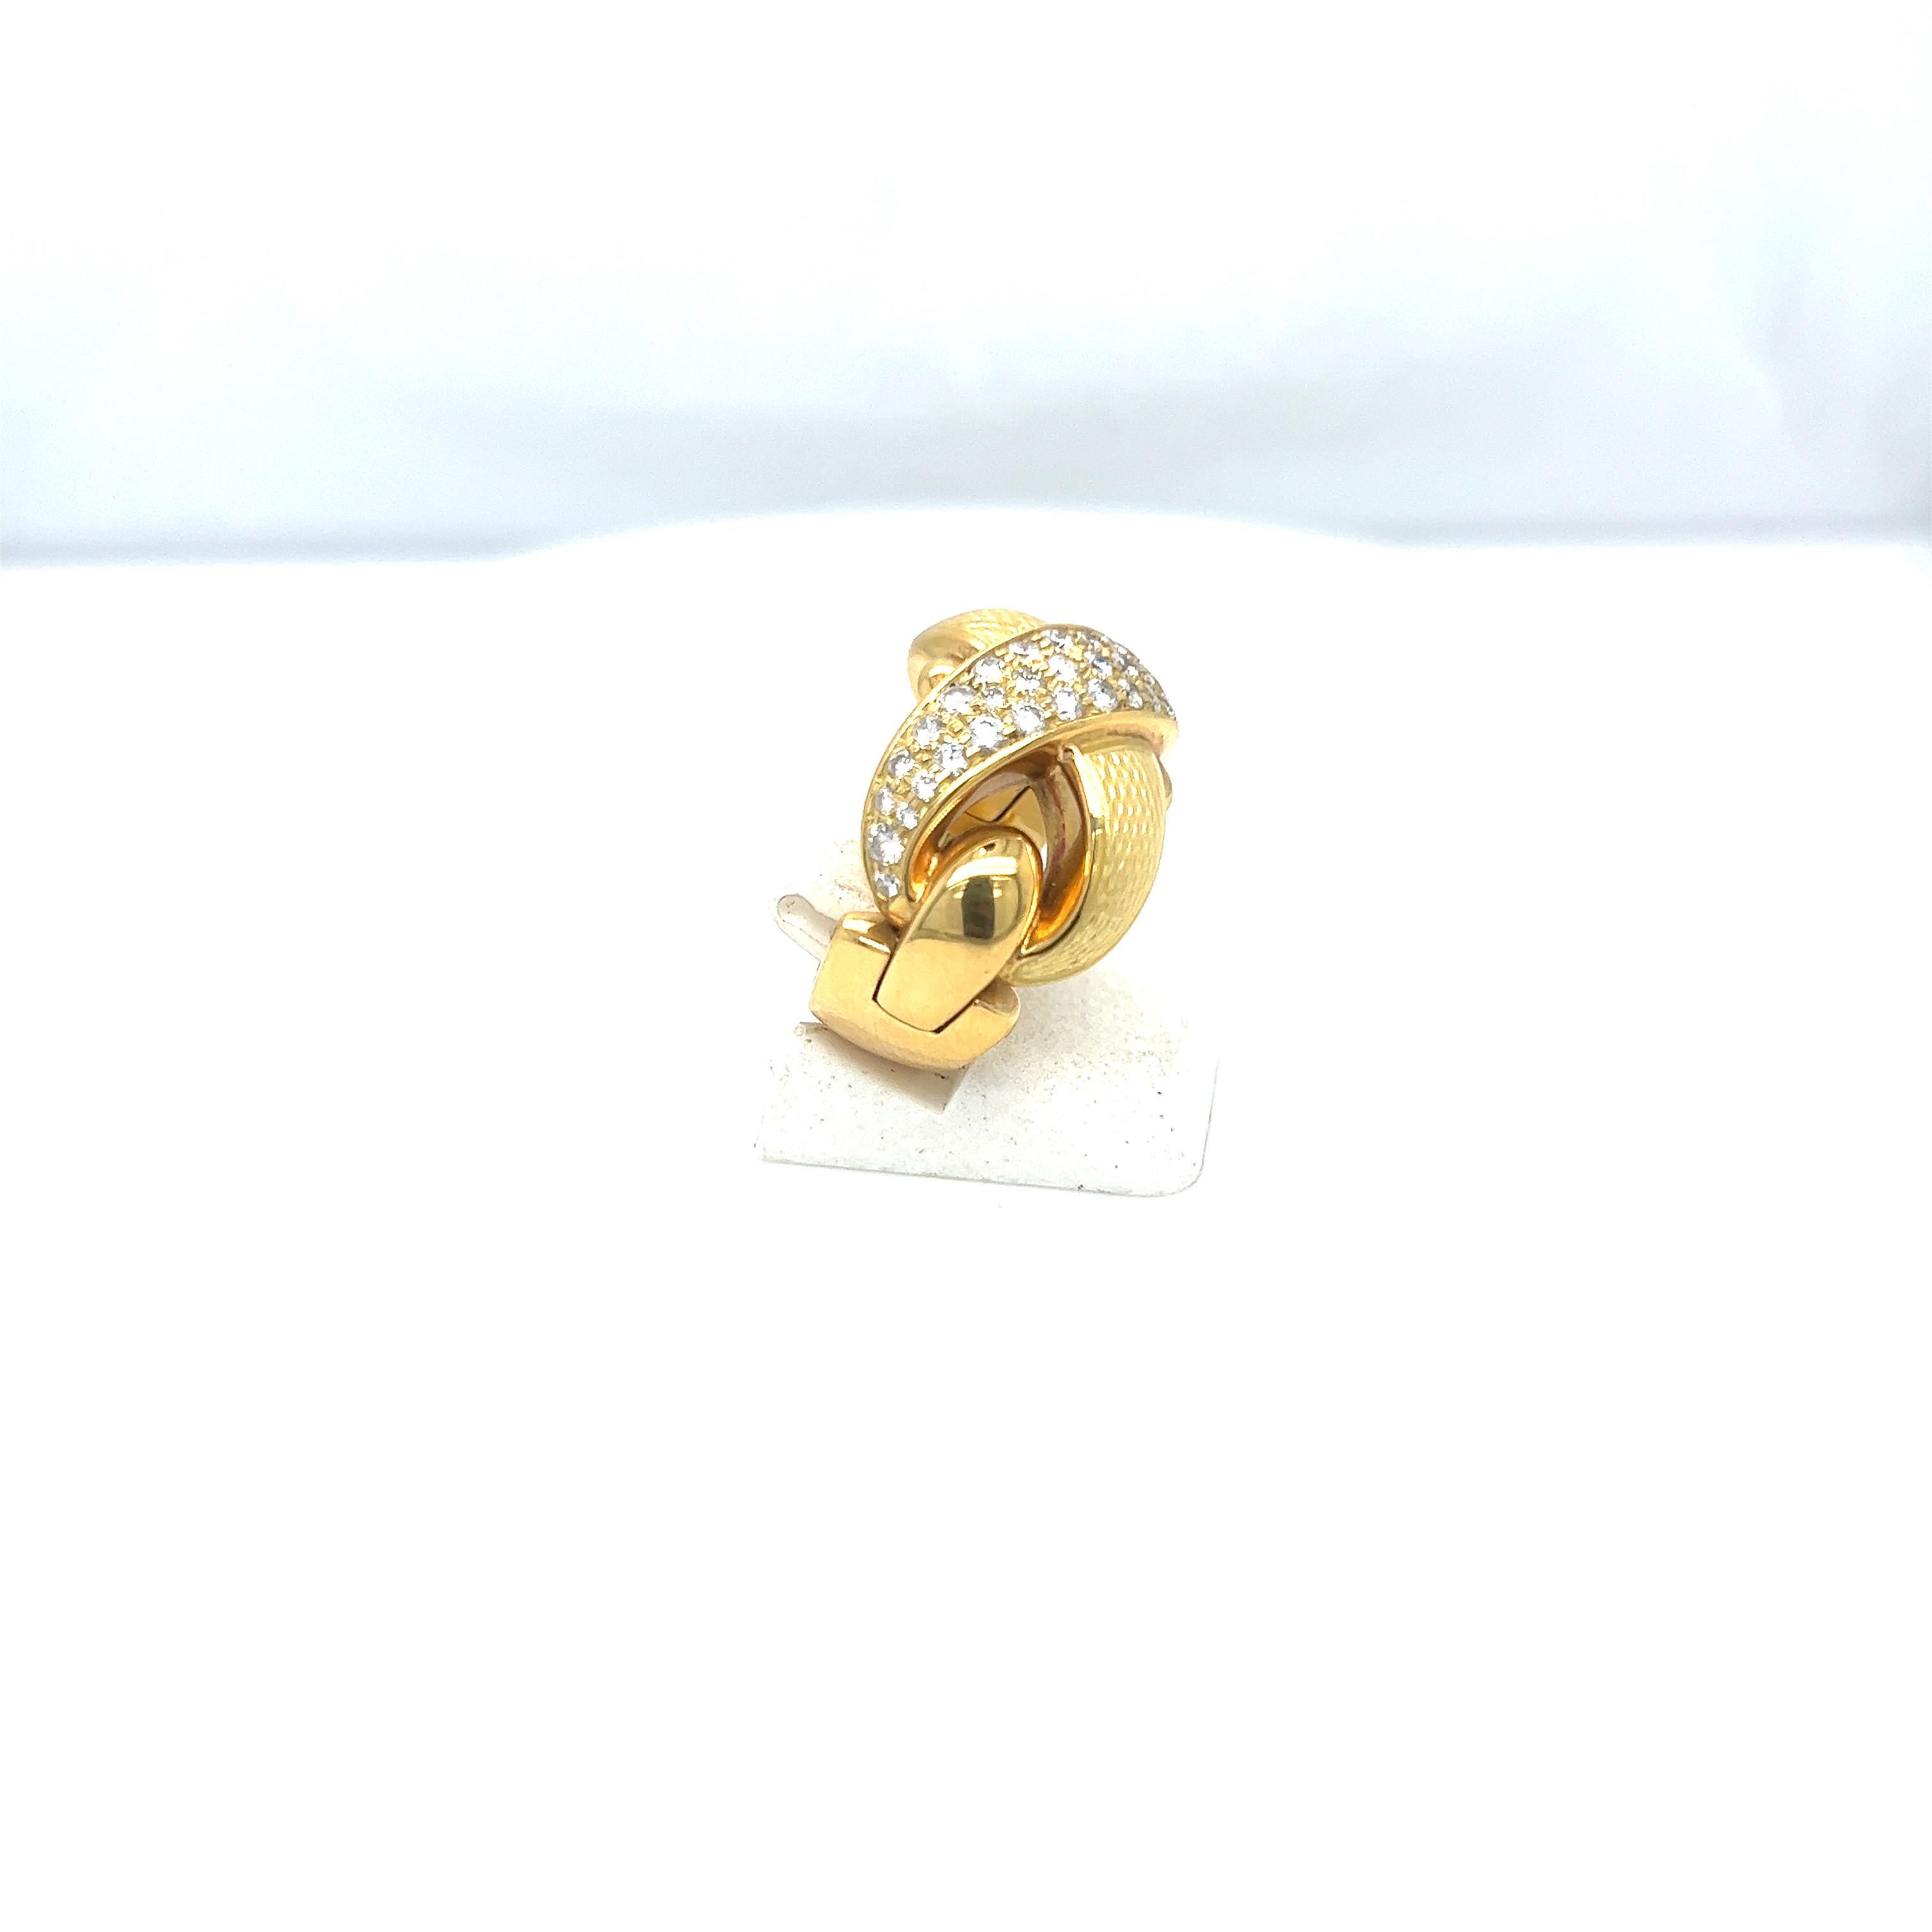 Started in 1967 by Leo and Ginnie de Vroomen the company is known for bold and innovative designs. Distinctive from the start, the renowned company is simply known as de Vroomen.
This  18 karat yellow gold ring is designed using guicholle enamel in